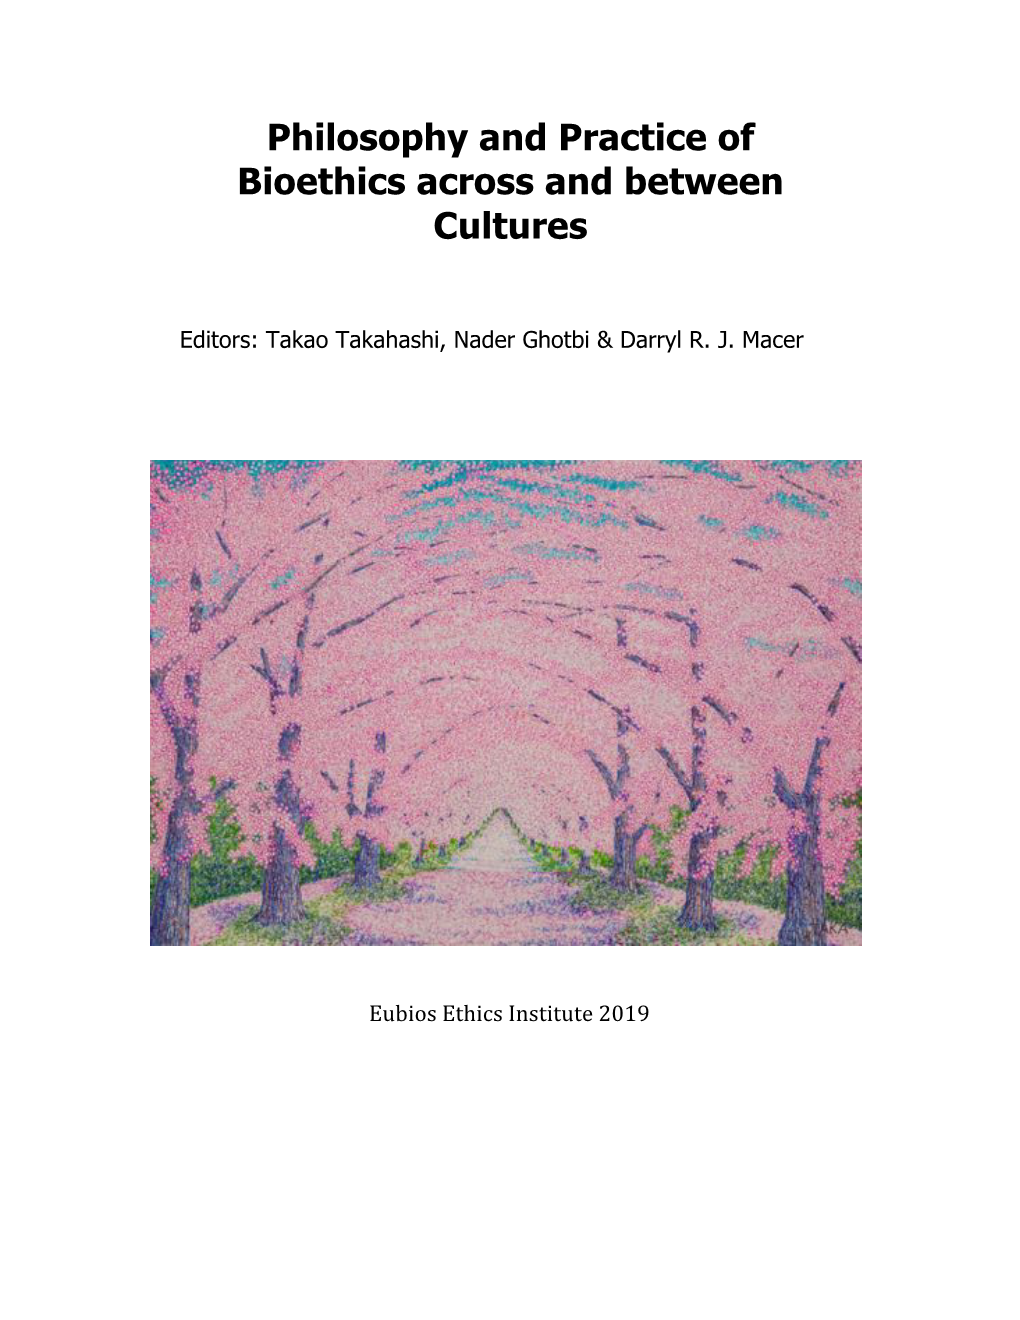 Philosophy and Practice of Bioethics Across and Between Cultures